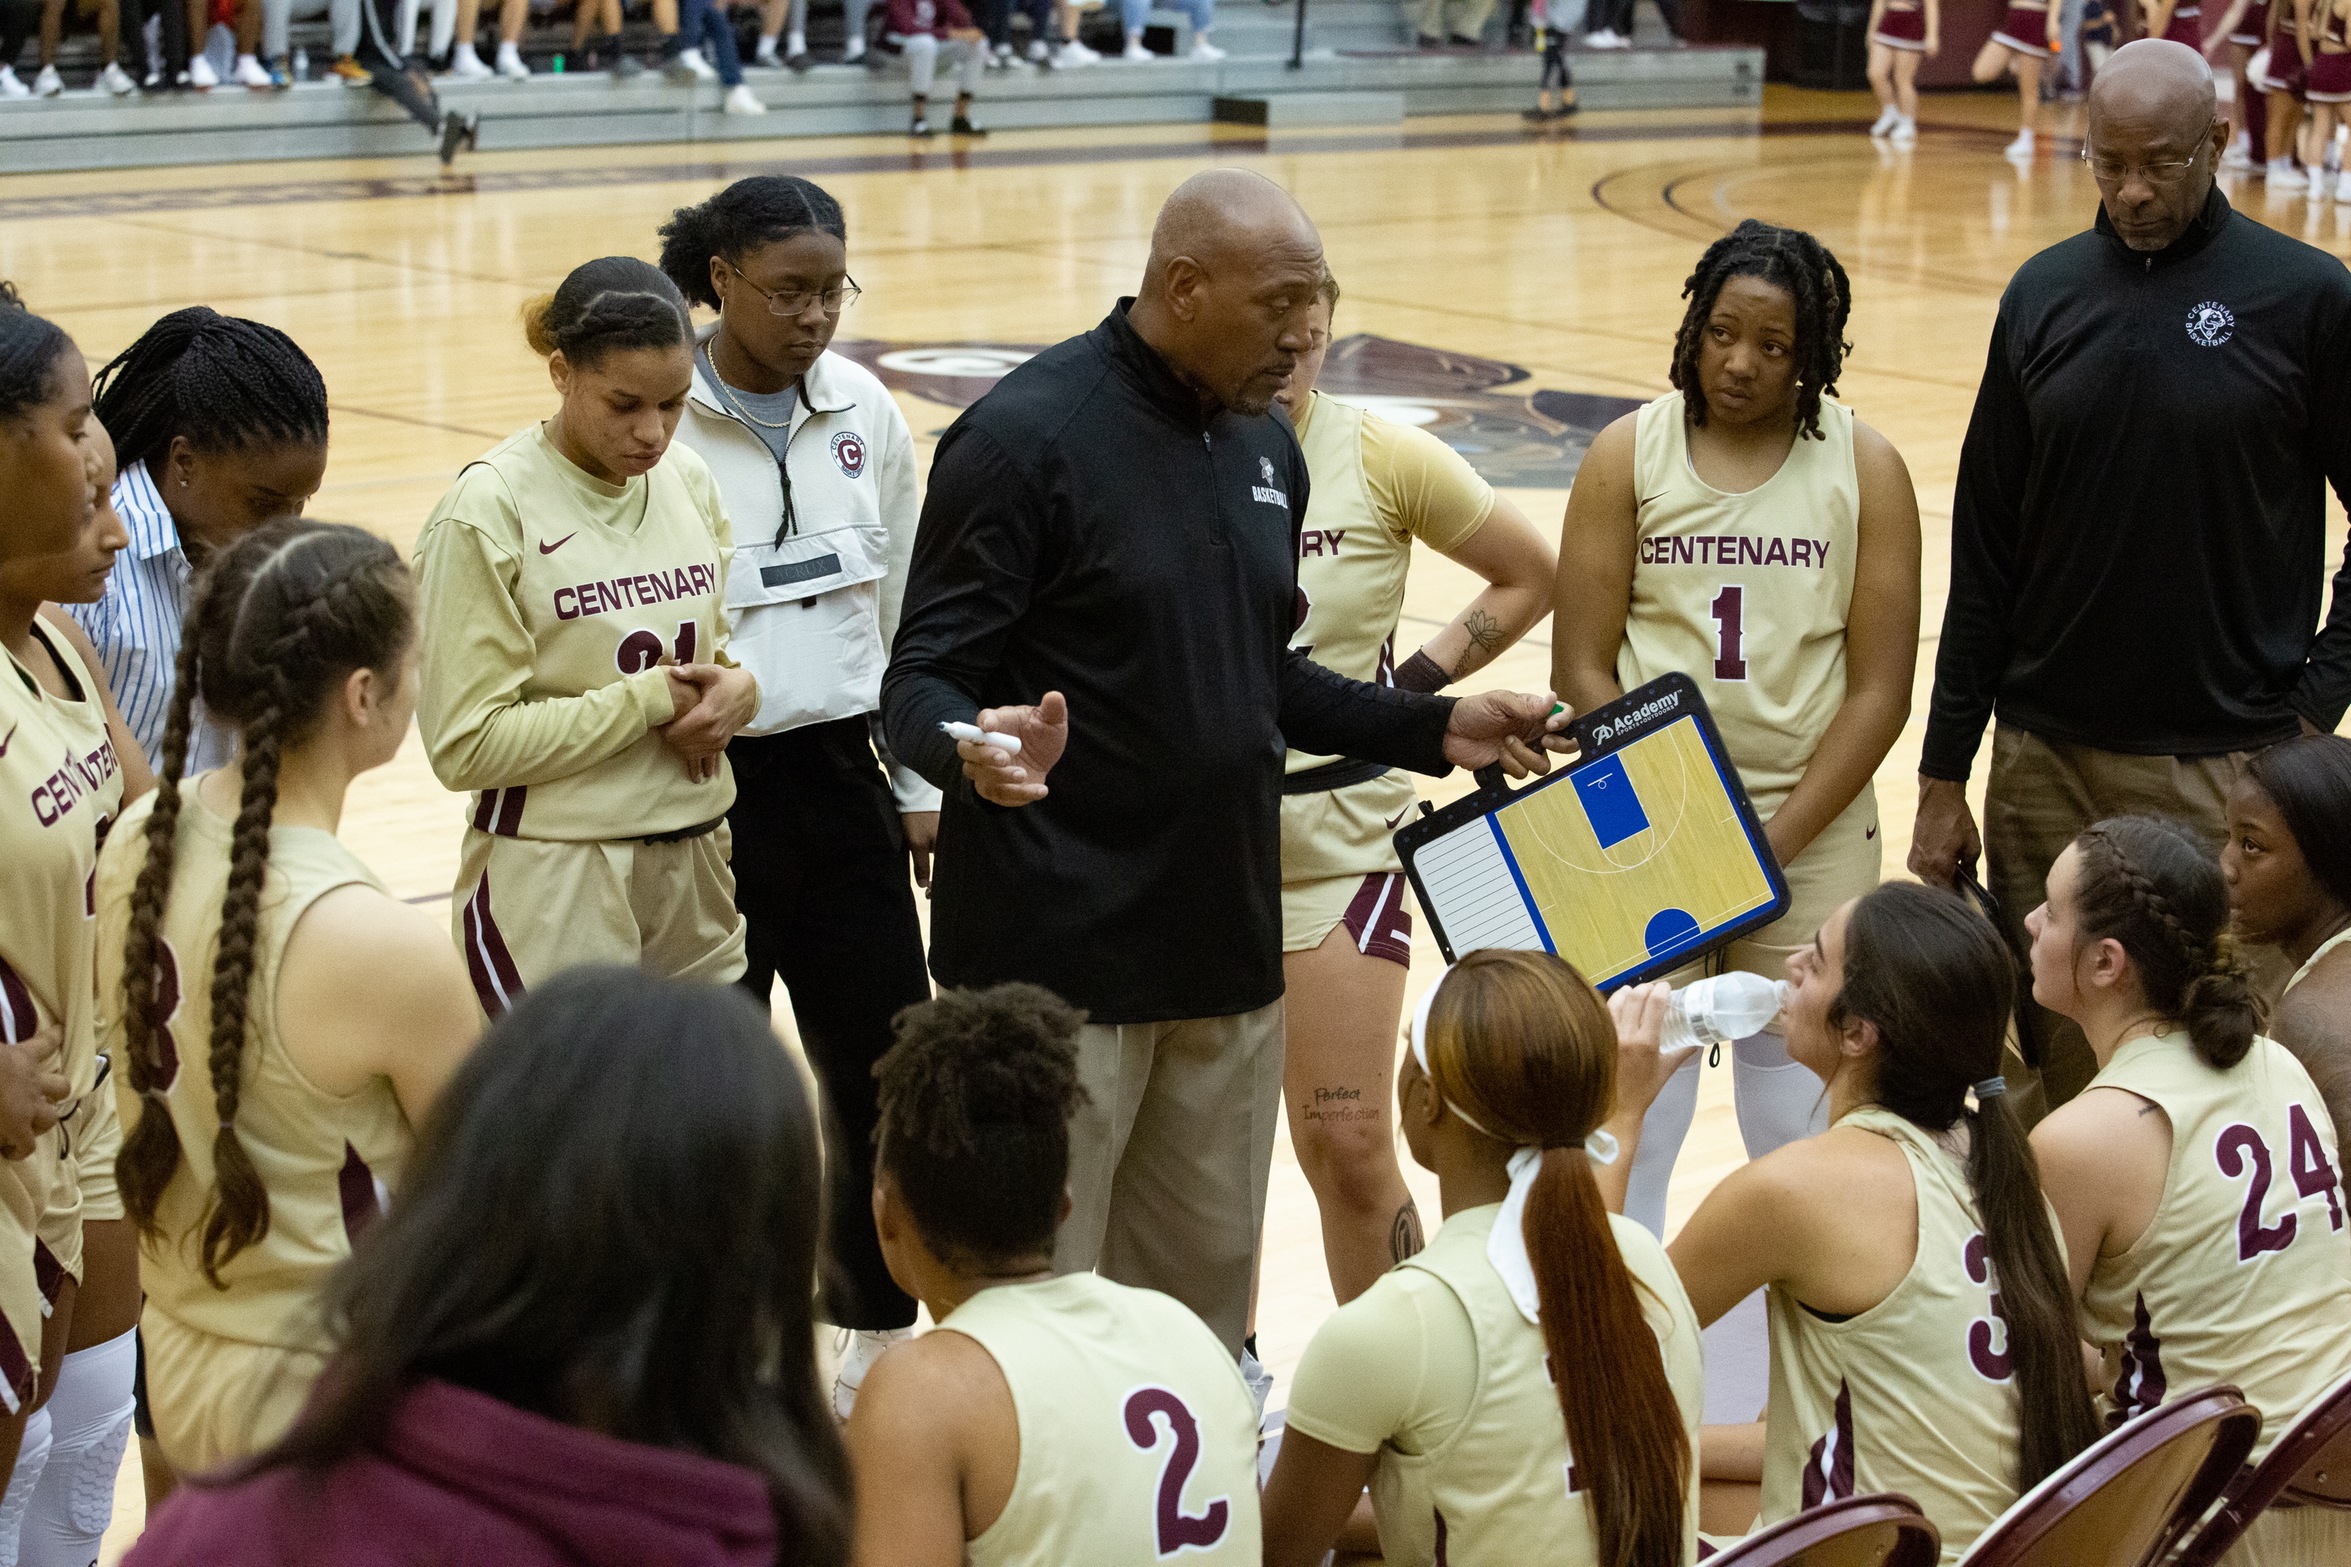 Ladies Fall At Southwestern On Friday, 58-49